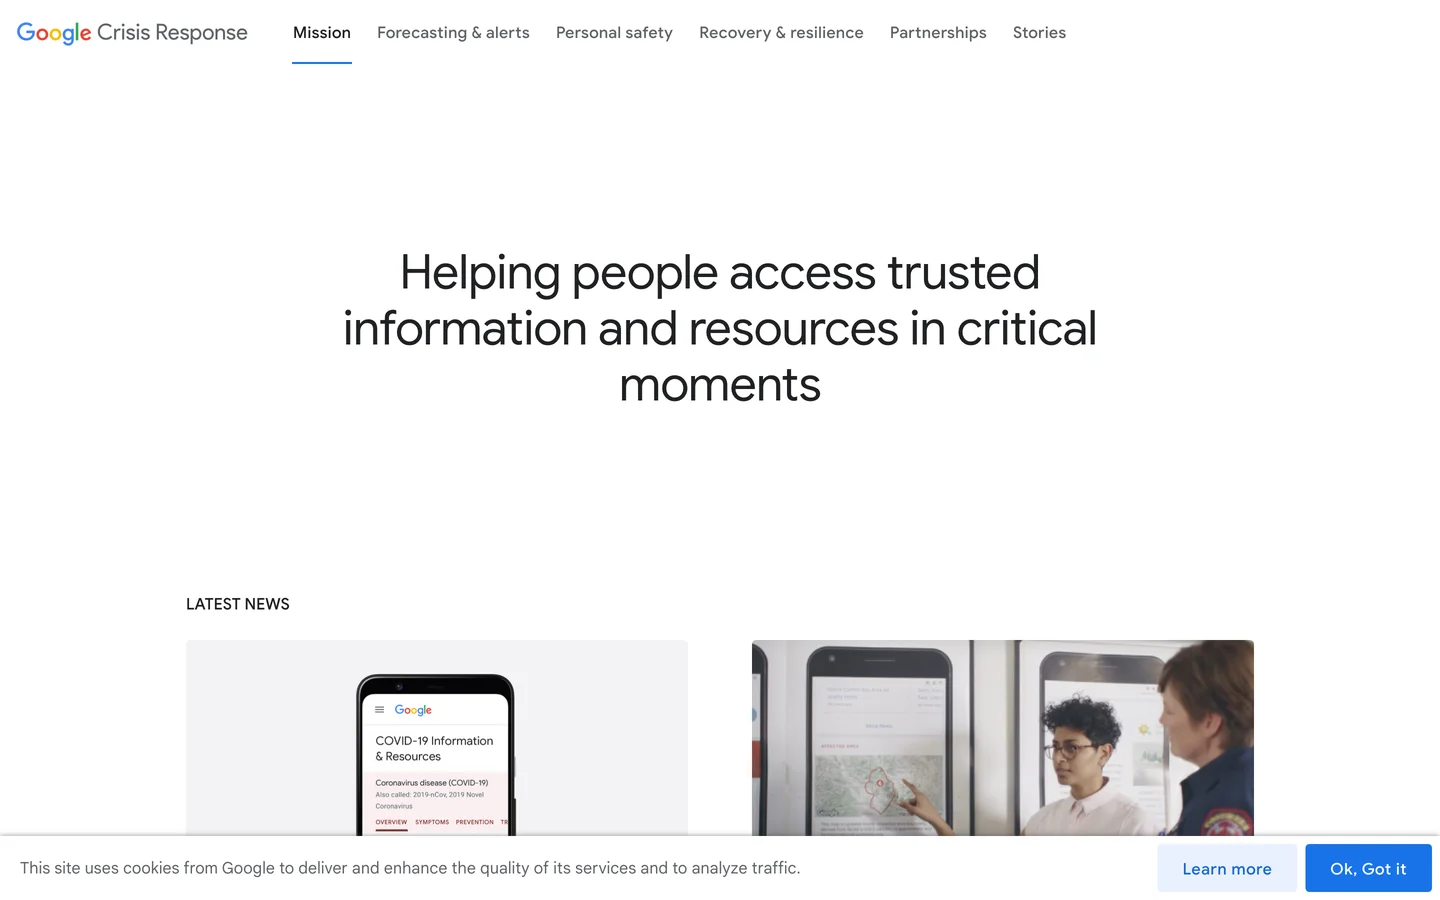 Helping people access trusted information and resources in critical moments - Google Crisis Response